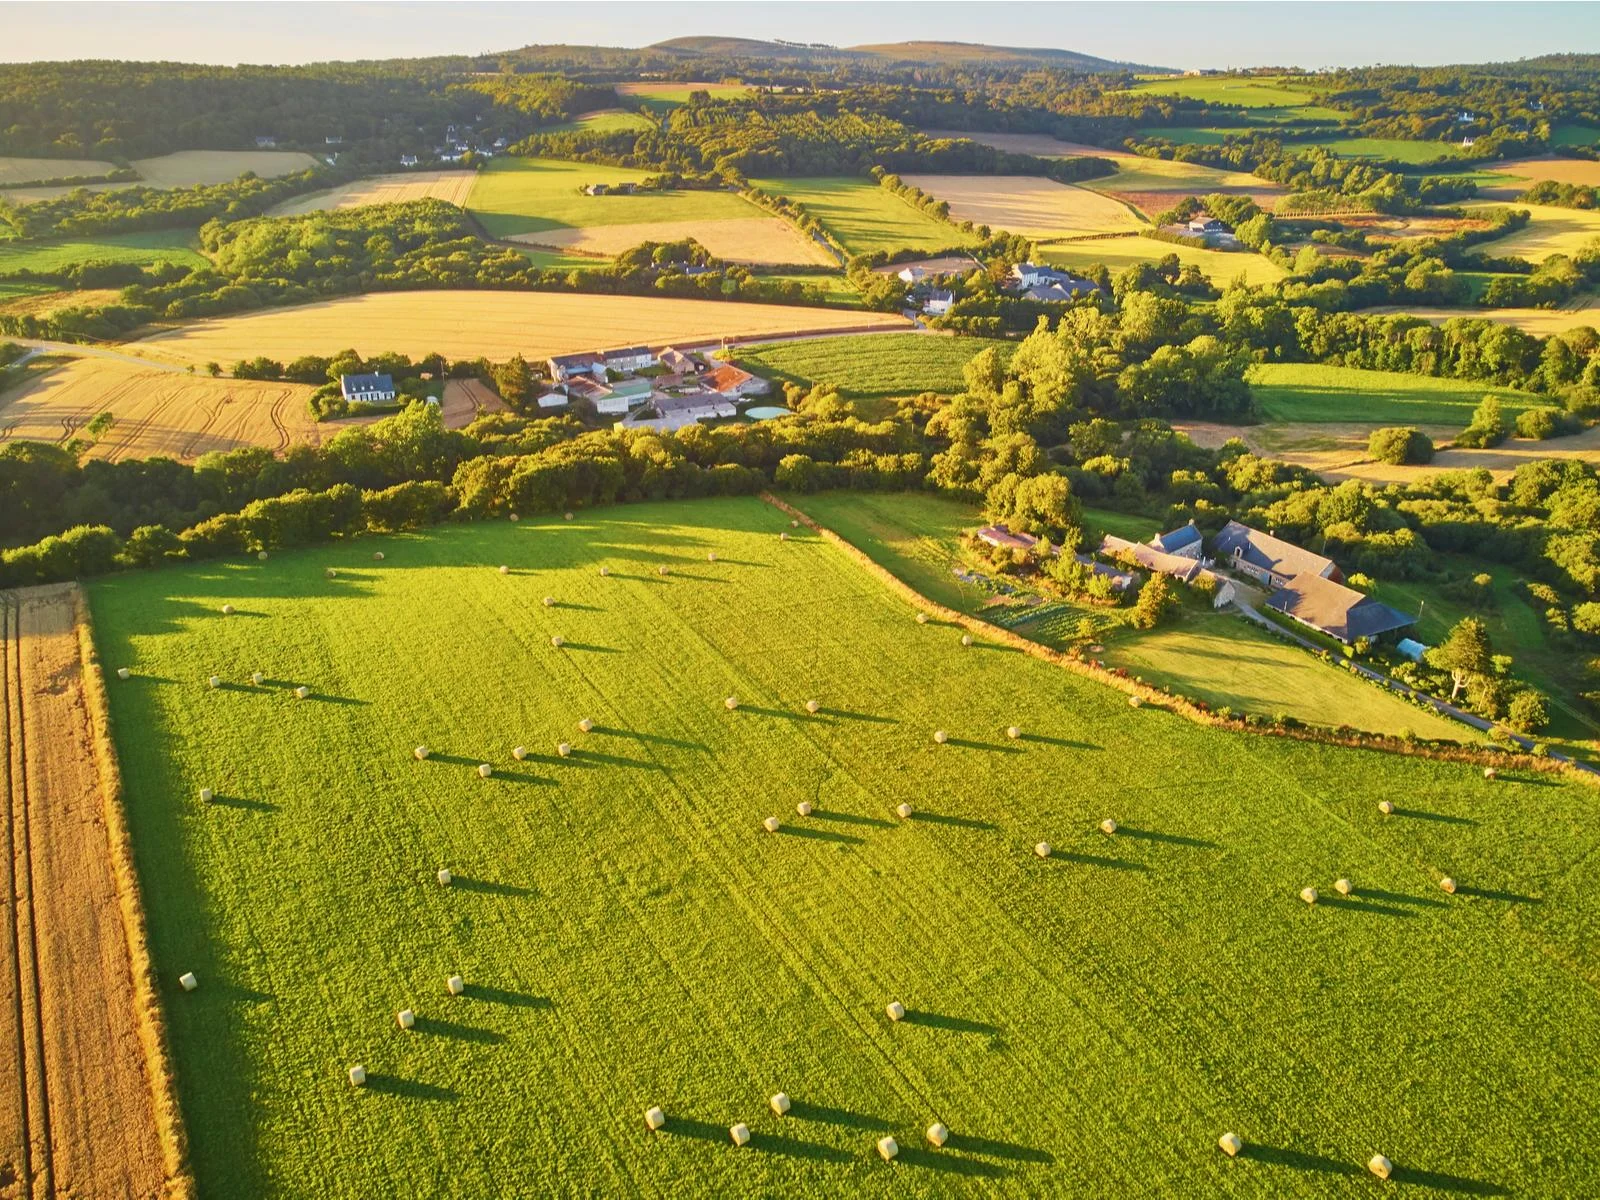 For a piece on the least expensive time to visit France, aerial view of farmlands and countryside in Brittany